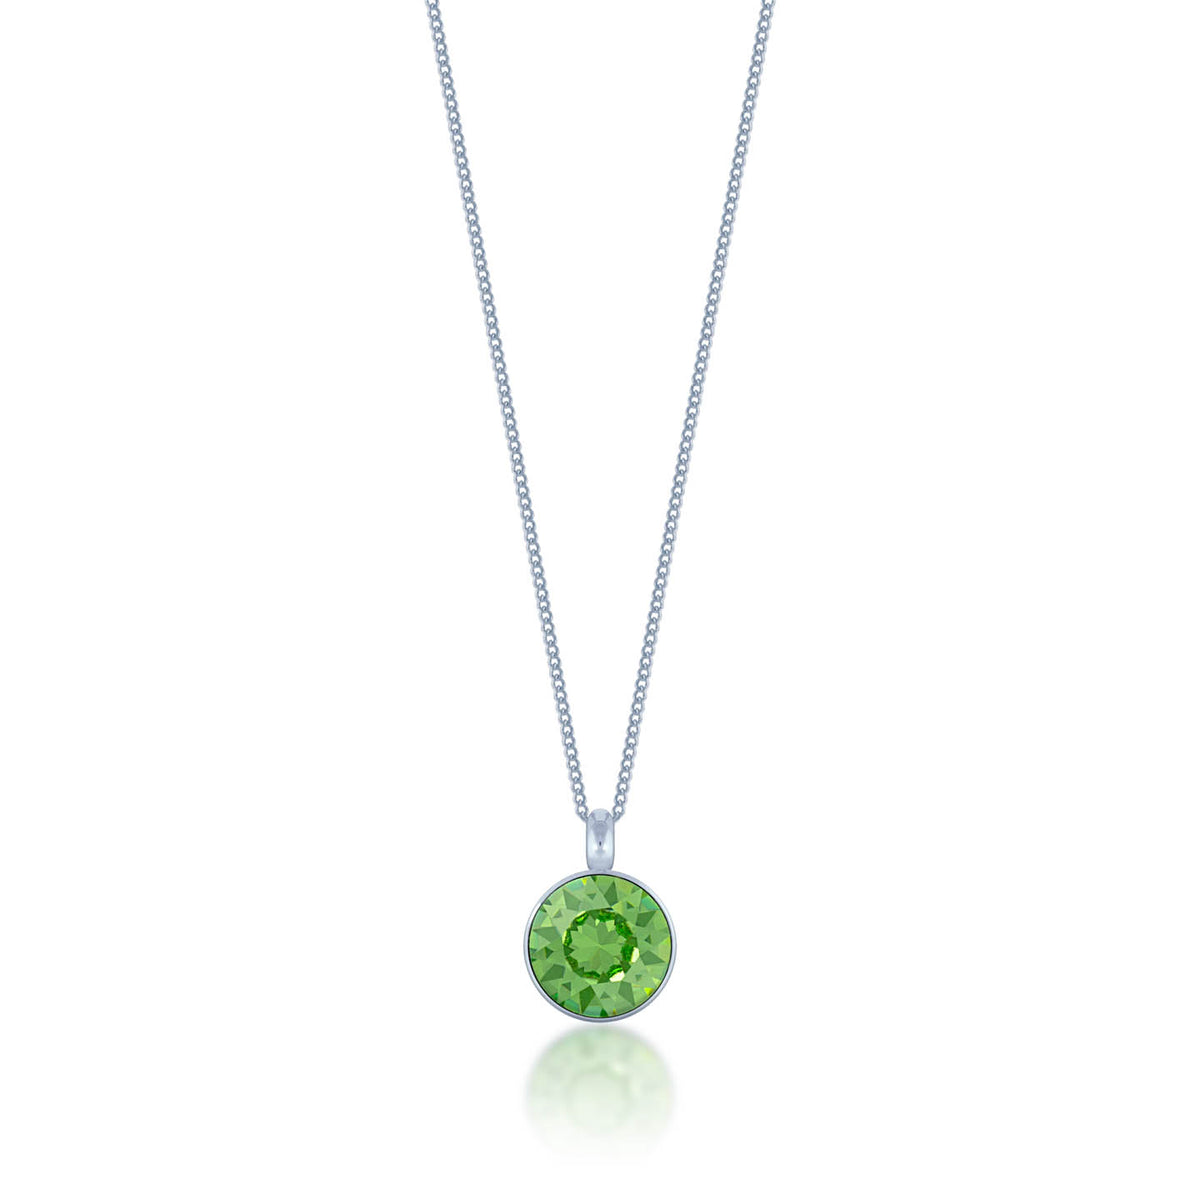 Bella Pendant Necklace with Green Peridot Round Crystals from Swarovski Silver Toned Rhodium Plated - Ed Heart